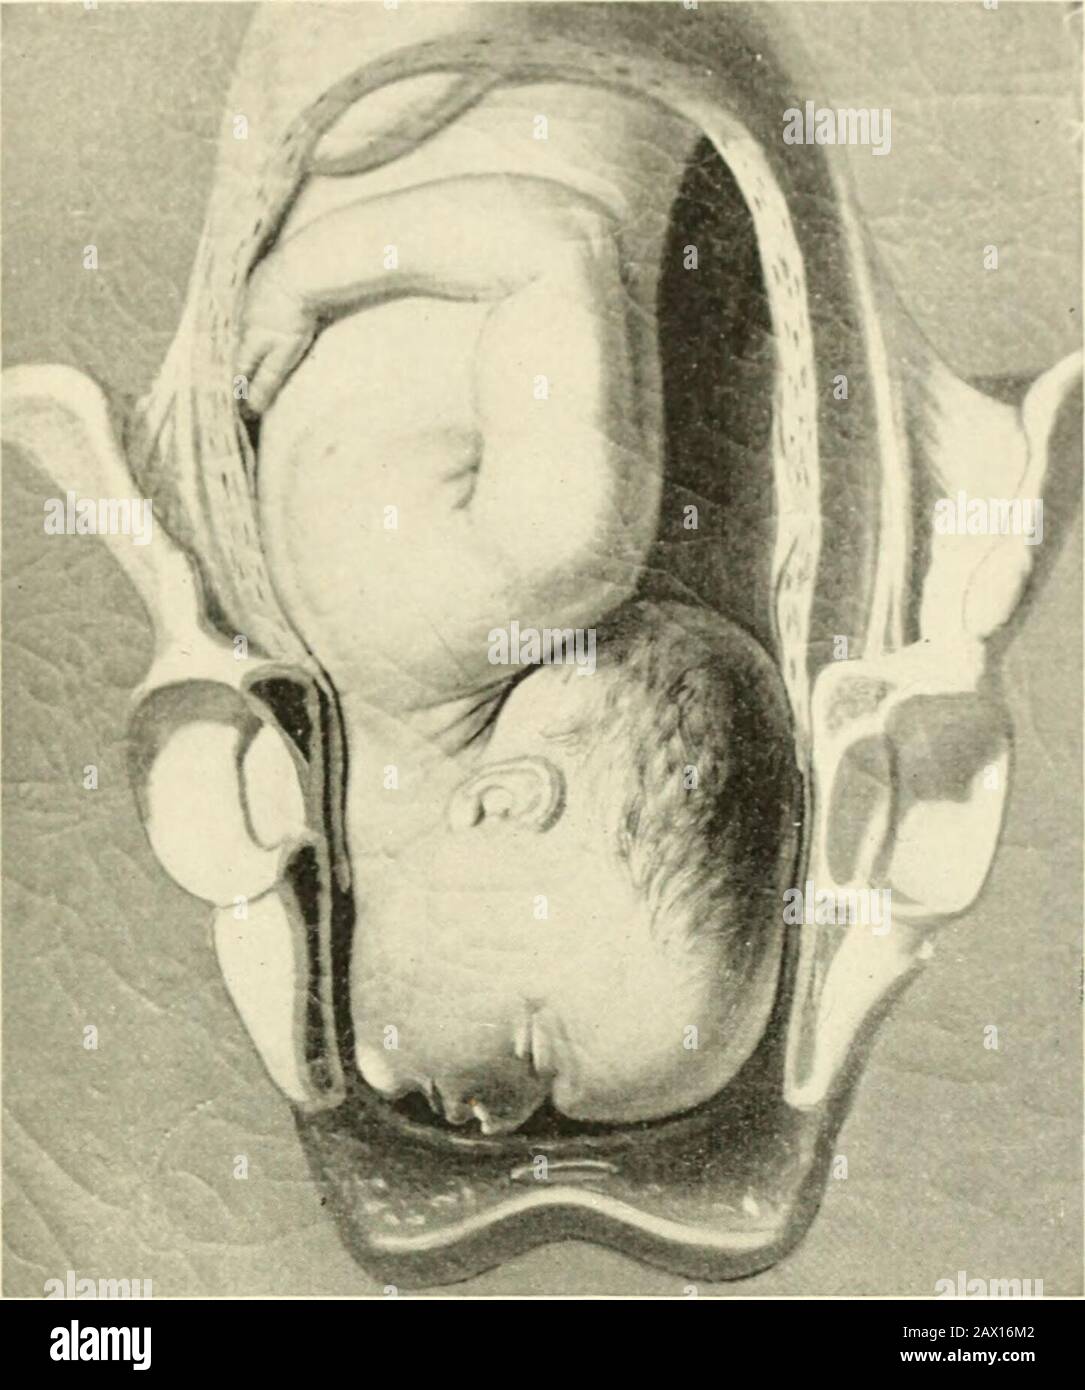 A textbook of obstetrics . hen follows the delivery of the head by flexion and propul-sion, the mouth, nose, eyes, and forehead sweeping over the peri-neum and appearing successively at the posterior commissure. Restitution and external rotation follow the escape of thehead from the same causes that impose these movements uponthe head in a vertex presentation. The delivery ot the bodytakes place as in a vertex presentation. Abnormalities in Mechanism.—The most common and mostimportant anomaly of mechanism is a delay in the forwardrotation of the chin under the symphysis. This delay isdm- to th Stock Photo